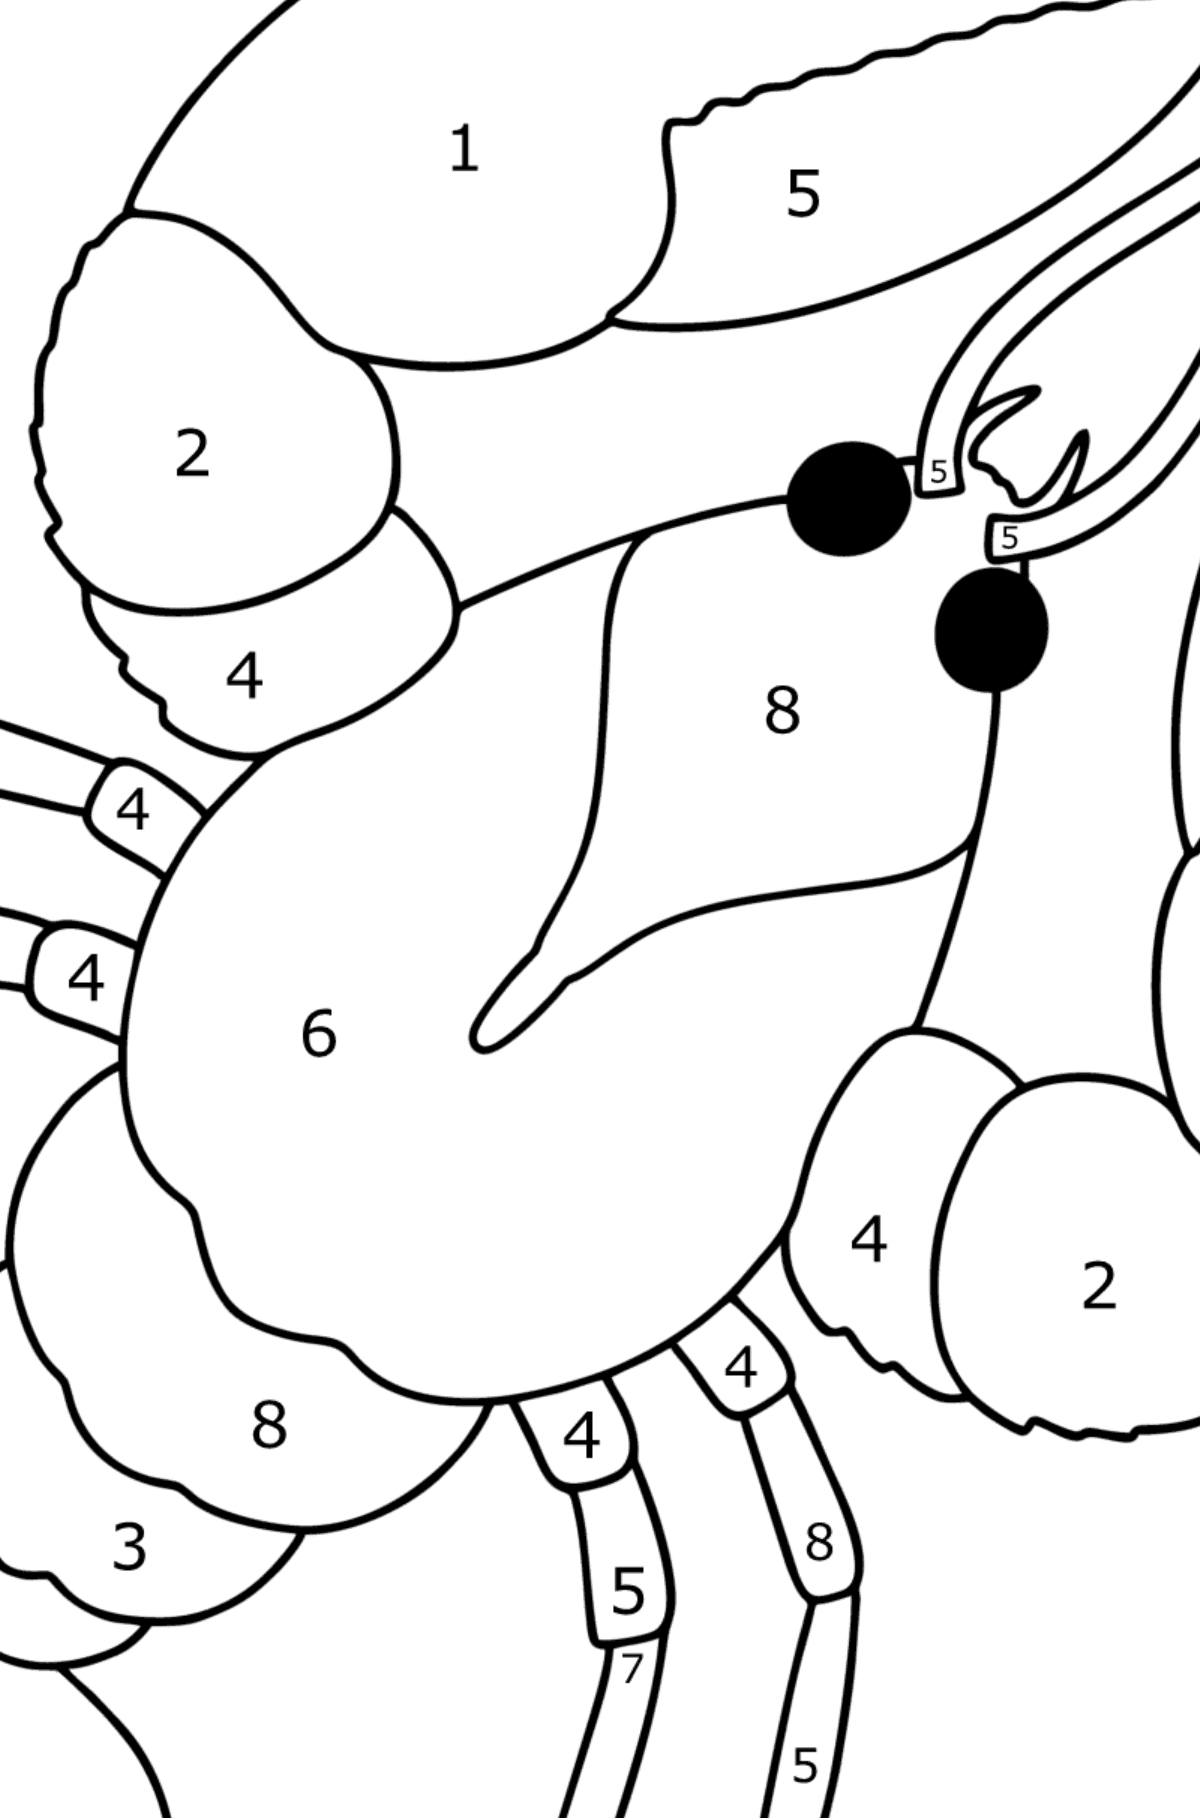 Lobster coloring page - Coloring by Numbers for Kids